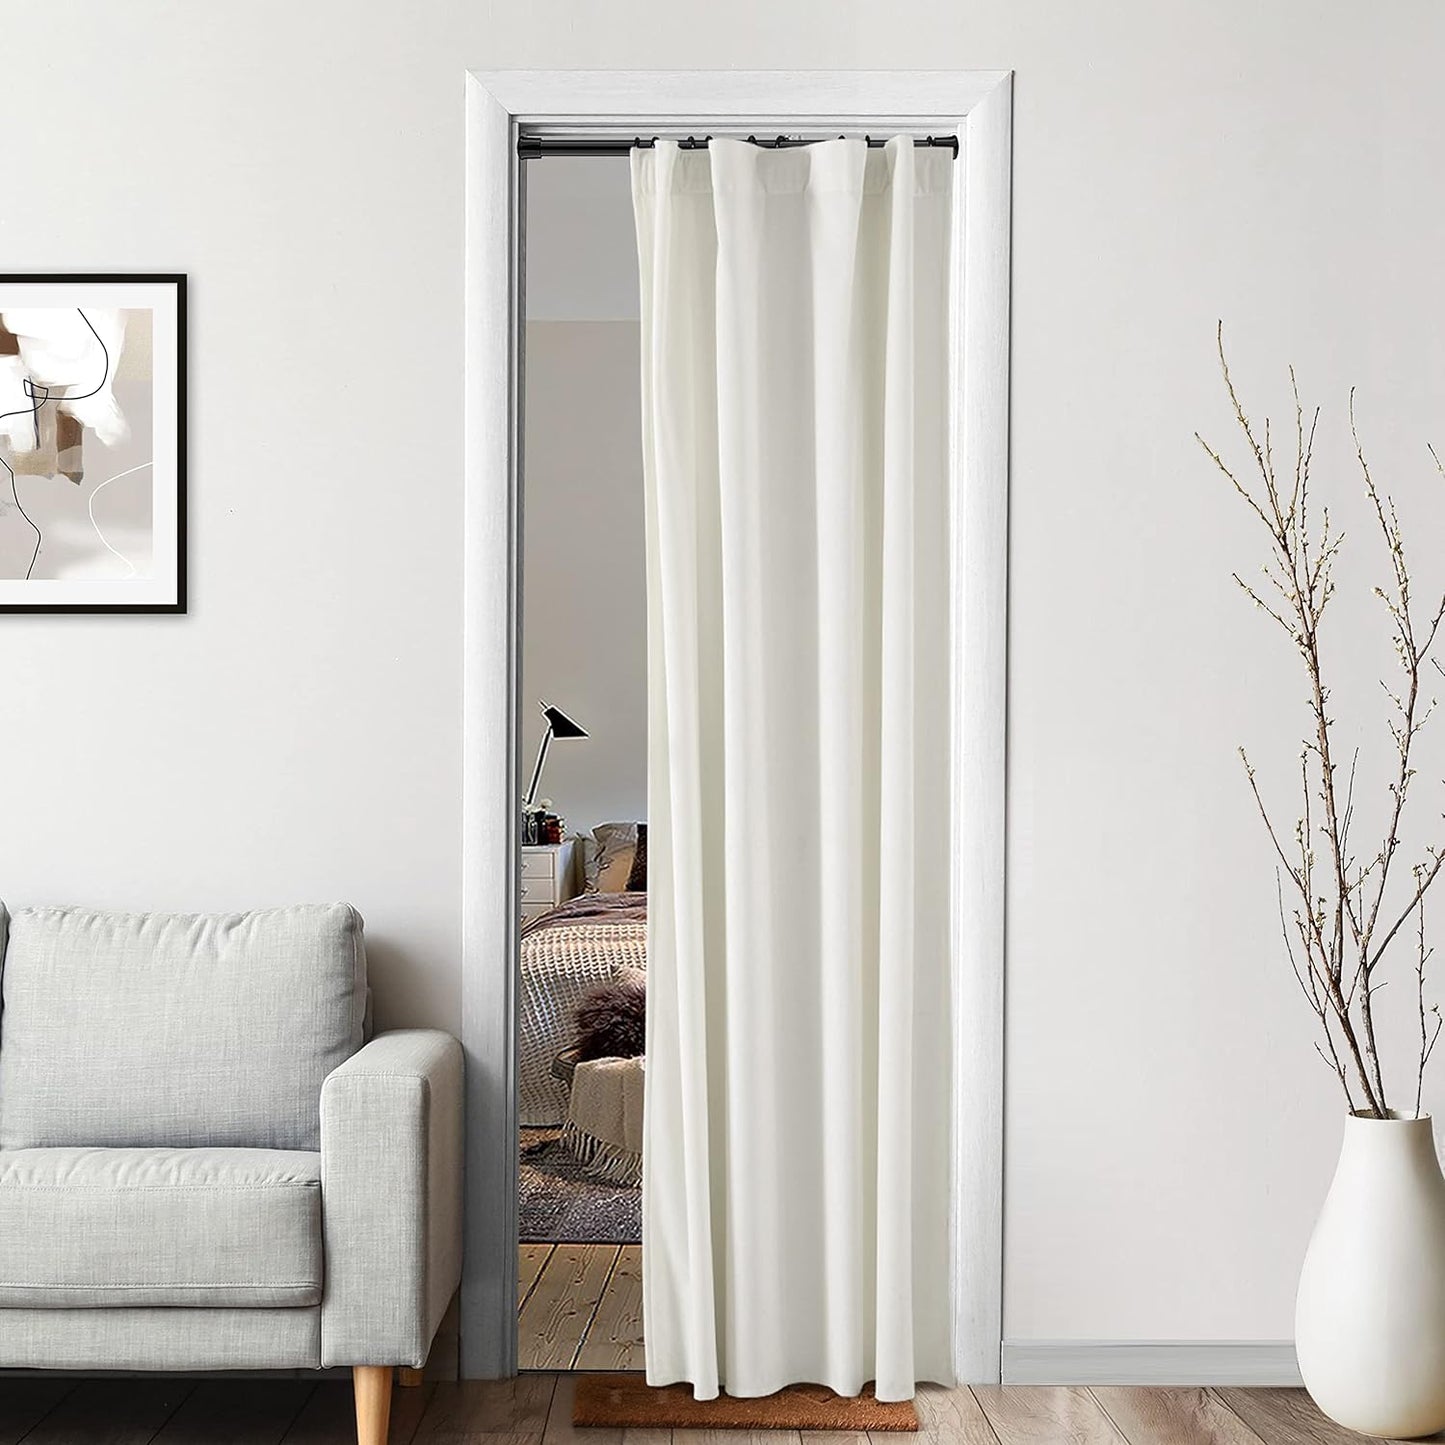 XTMYI Velvet Blackout Door Curtain Panels for Bedroom,Thermal Insulated Winter Warm Back Tab Rod Pocket Black Out Cover Doorway Curtains Privacy/Window Drapes,80 Inch Length  XTMYI TEXTILE Ivory 38X80 